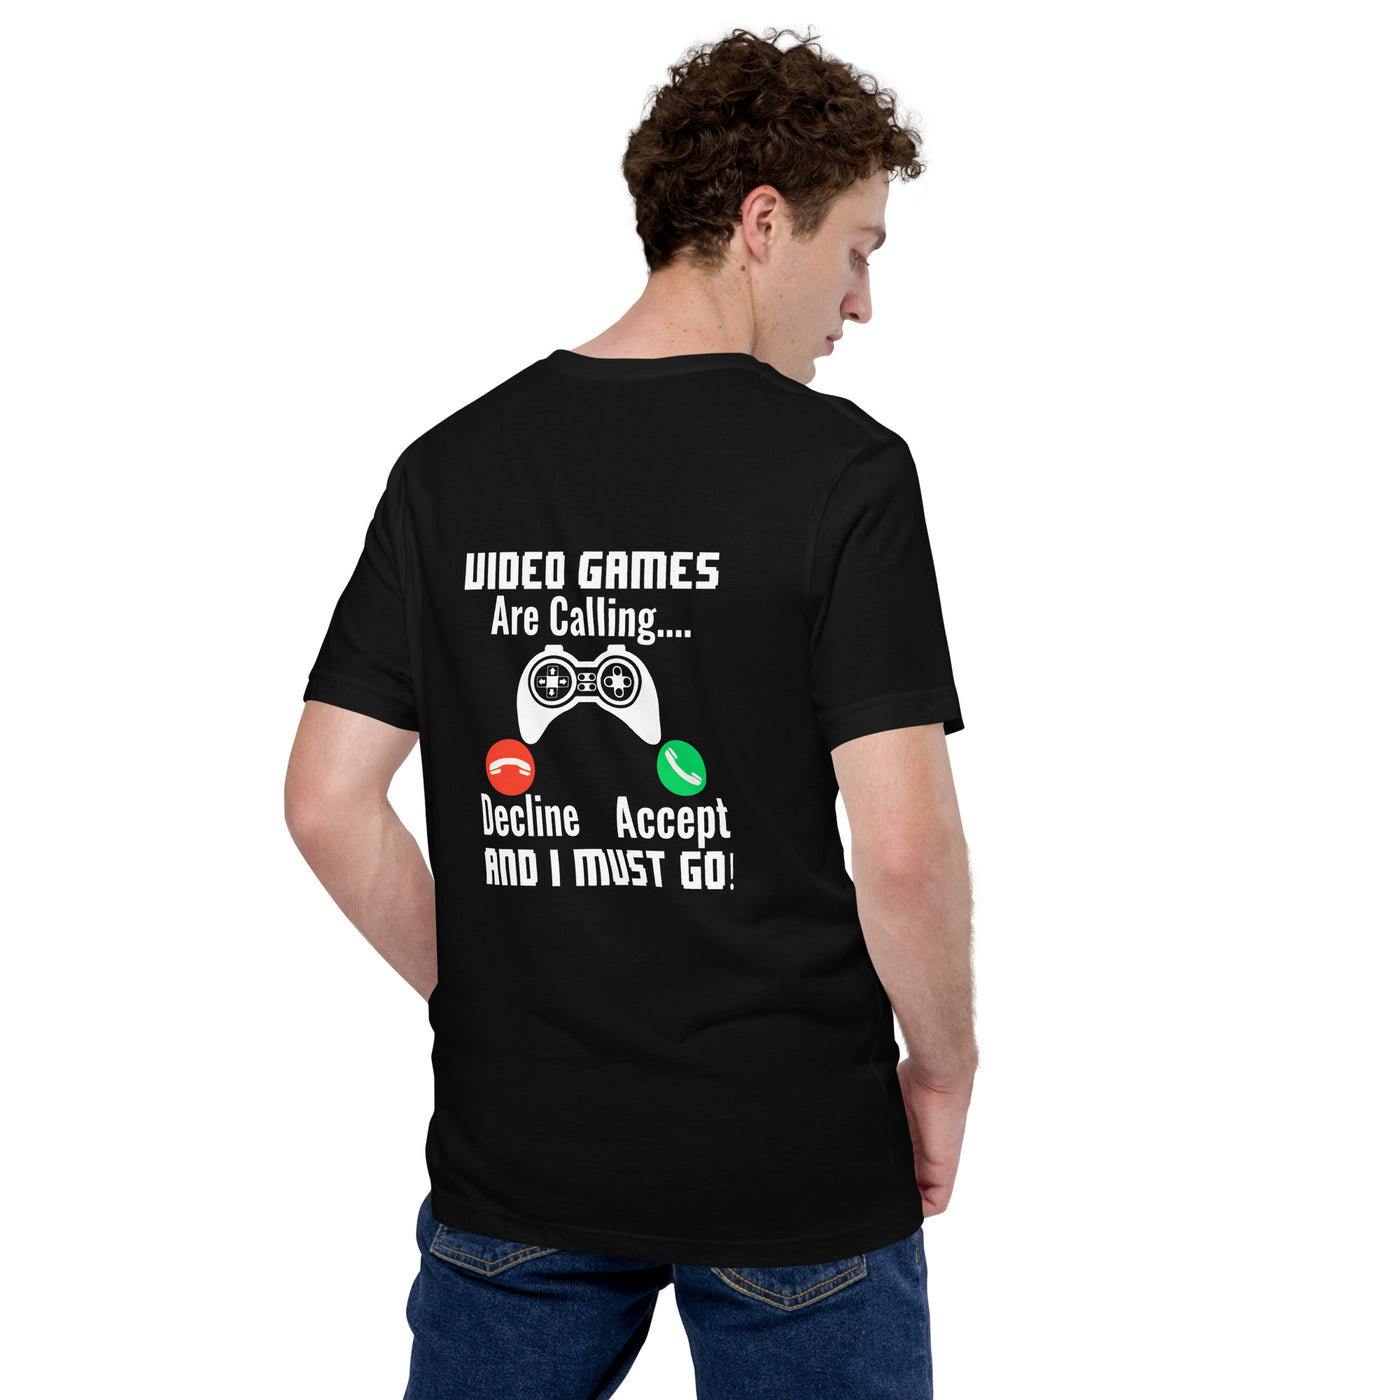 Video Games are Calling and I must Go Rima 18 - Unisex t-shirt ( Back Print )